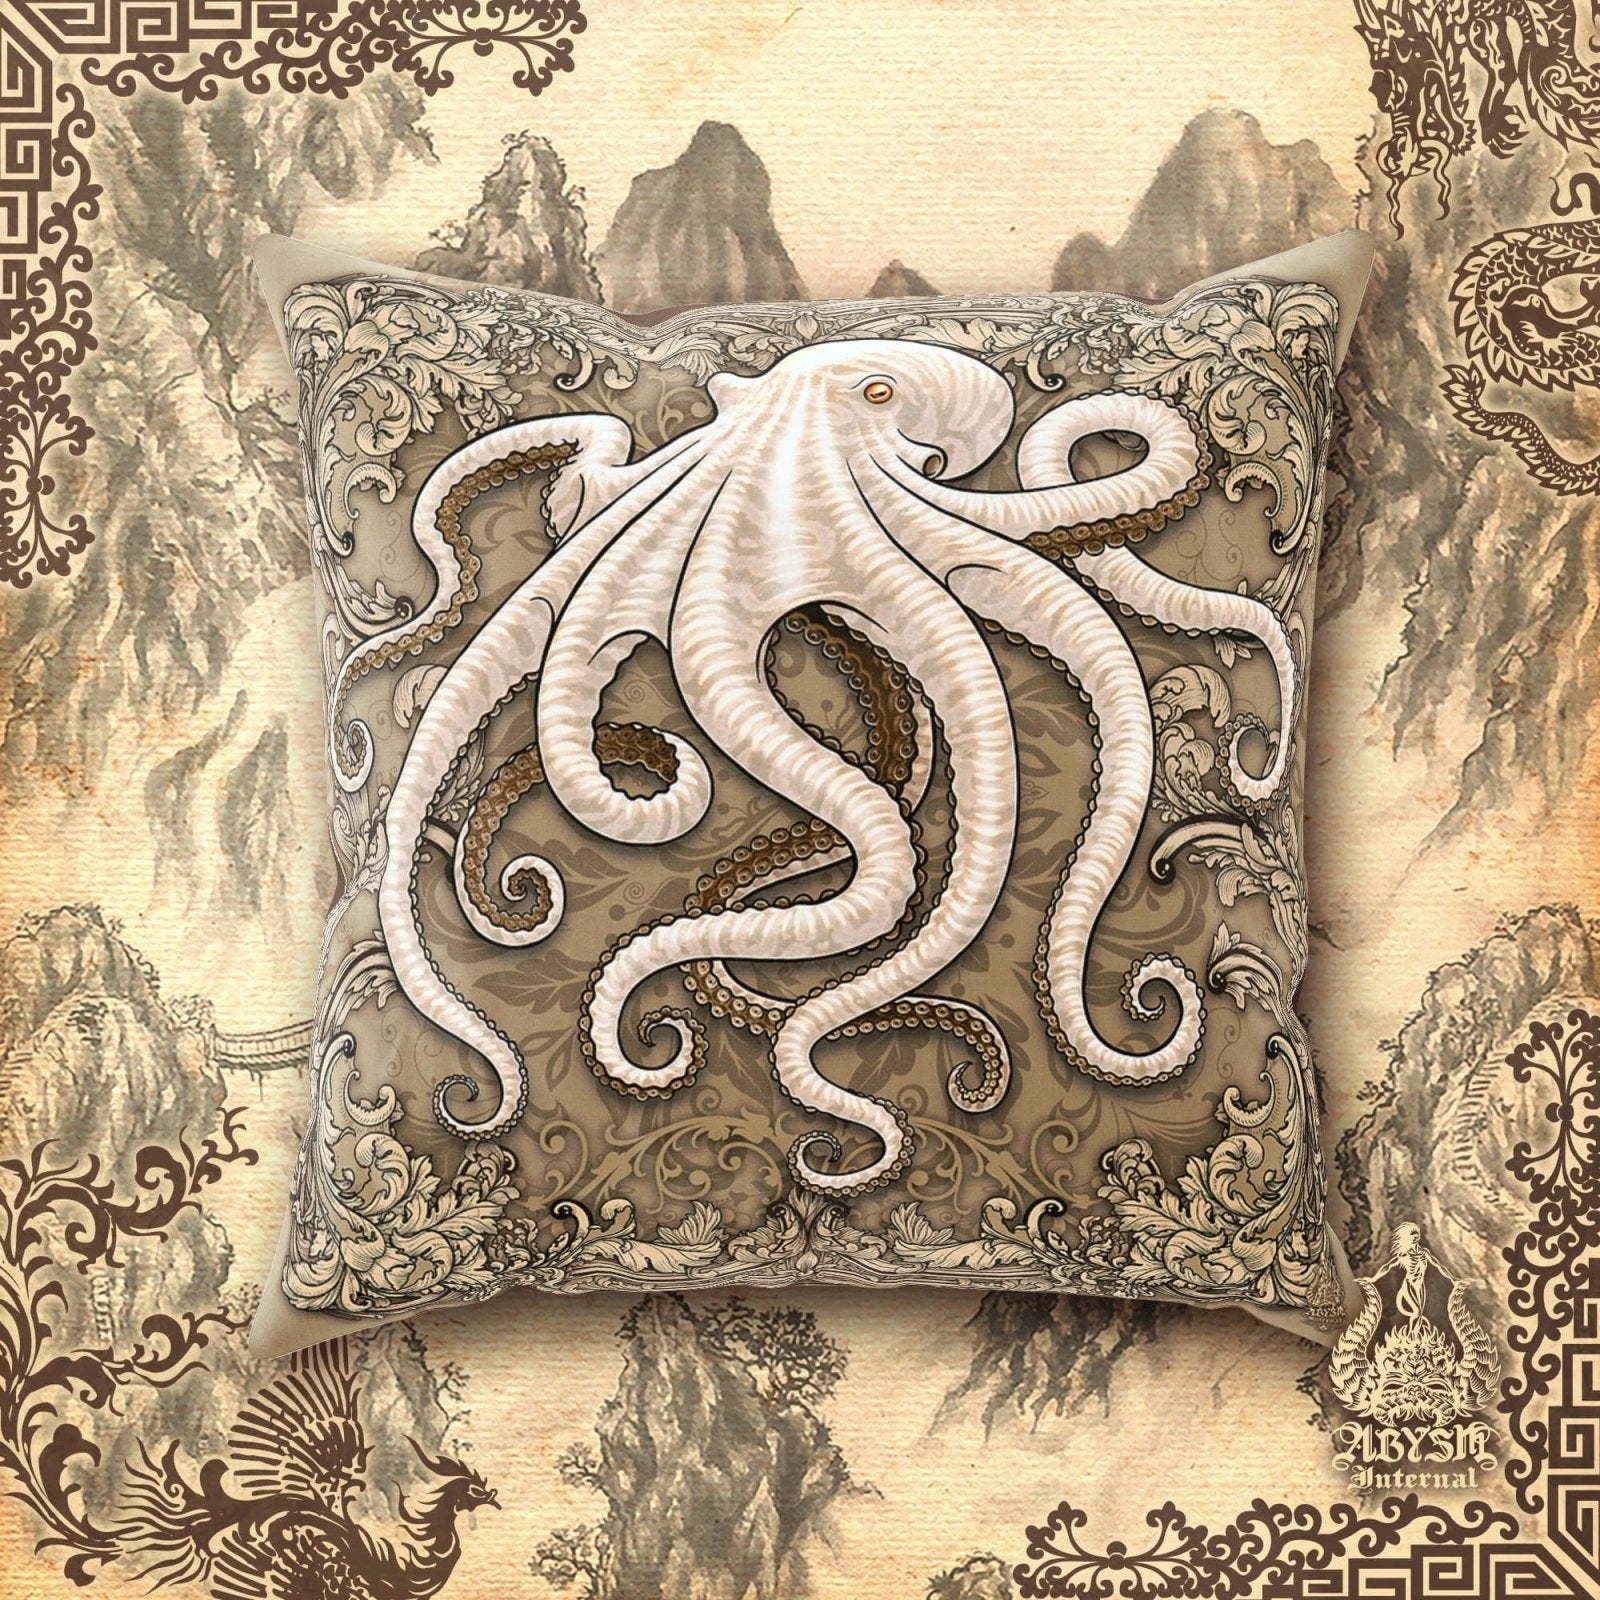 Beach Throw Pillow, Decorative Accent Cushion, Octopus Decor, Indie and Eclectic Design, Funky Home - Cream - Abysm Internal